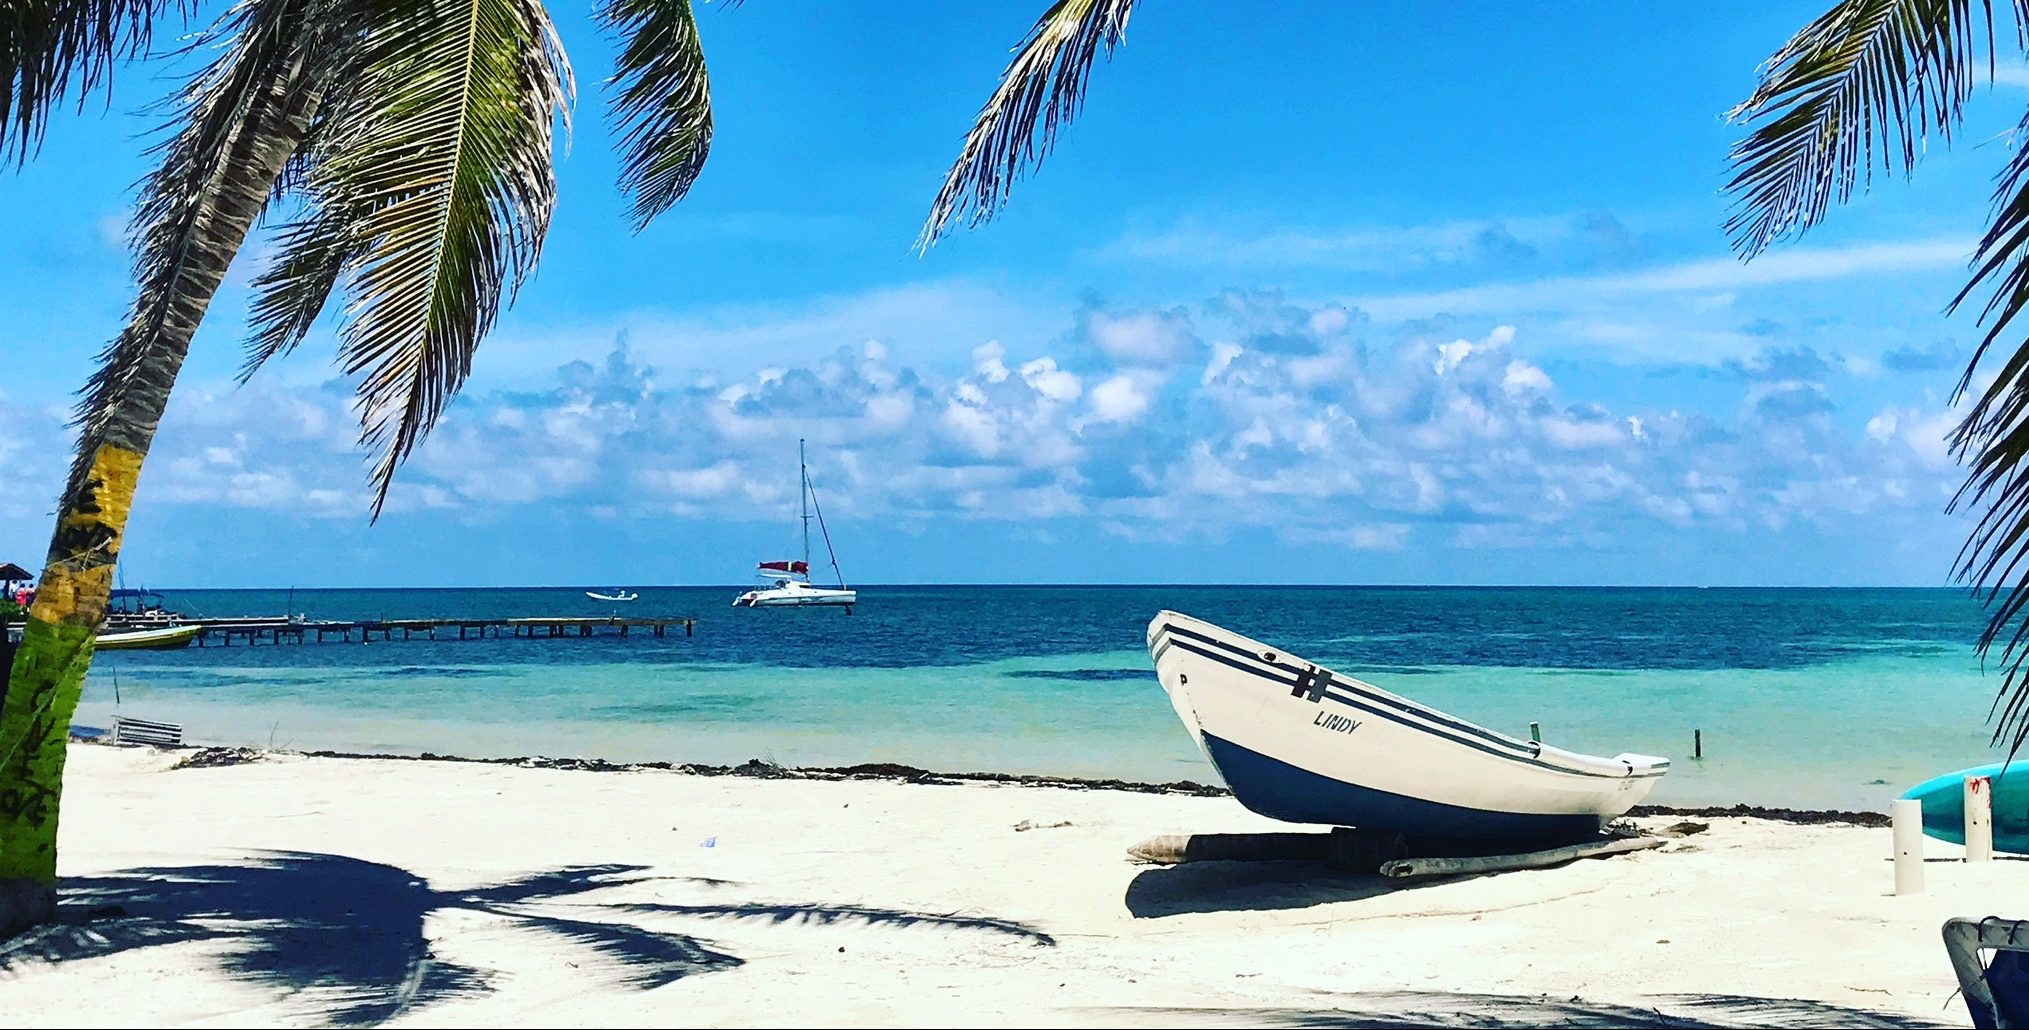 4 days in Ambergris Caye